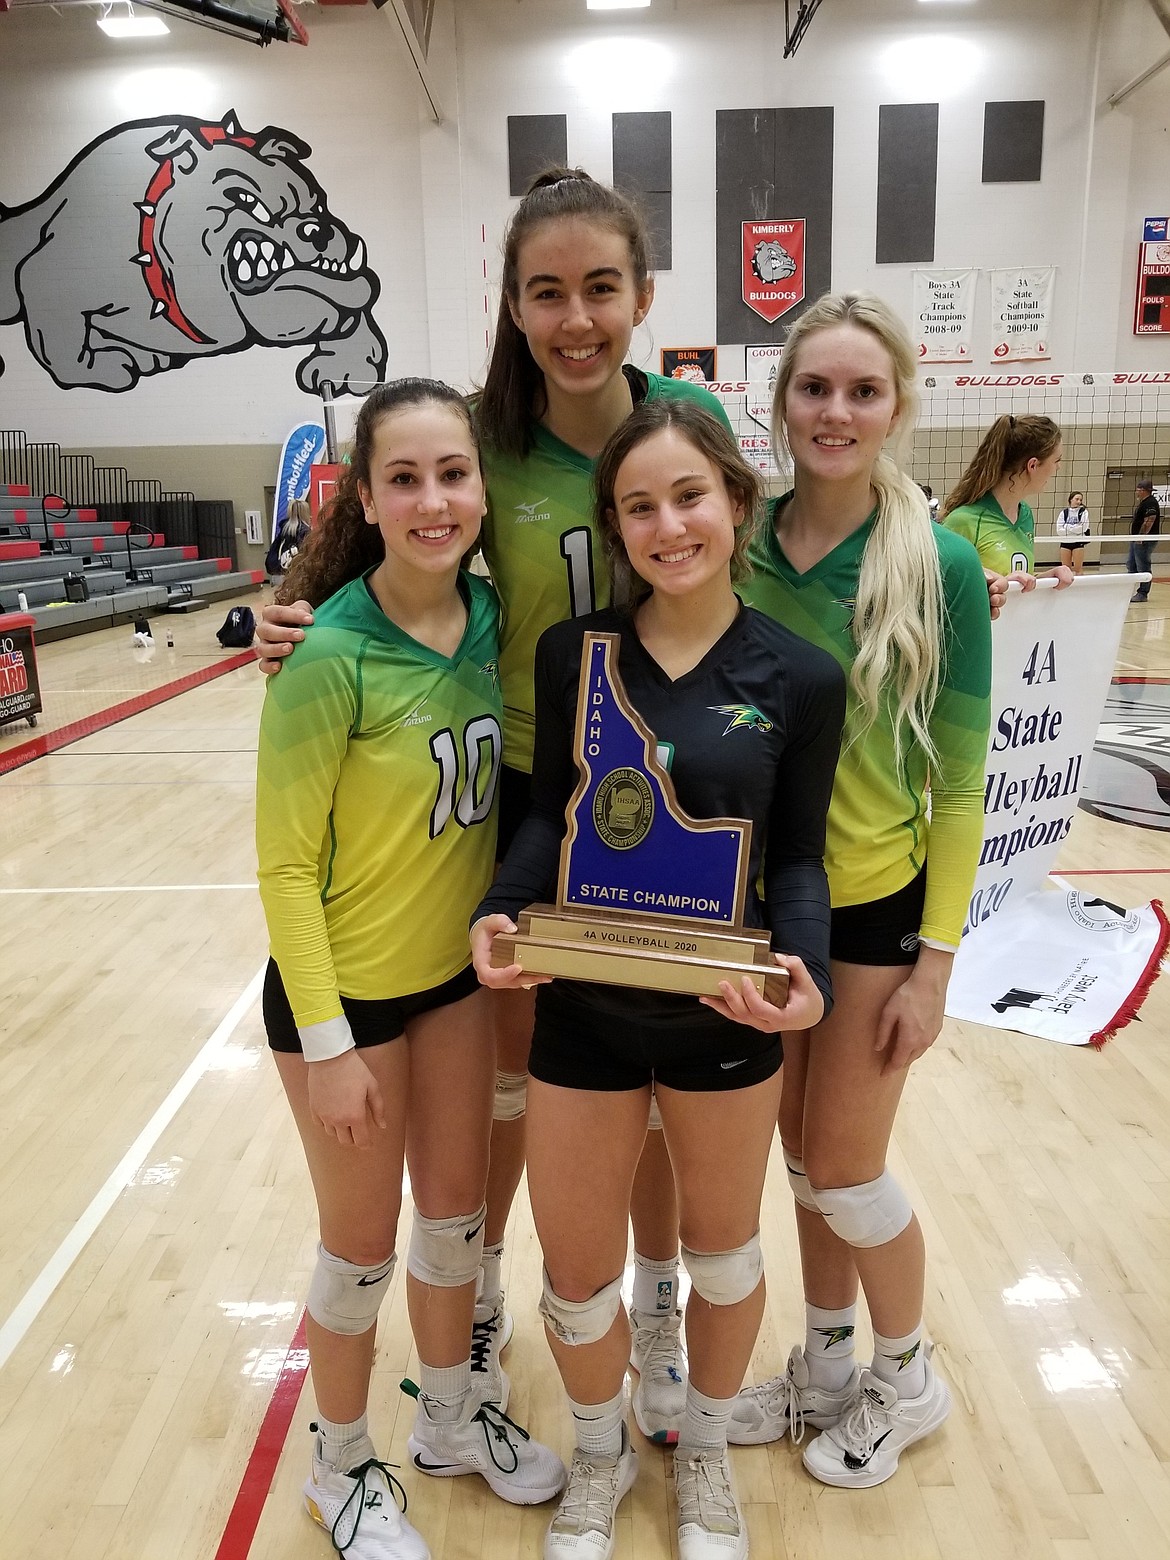 Courtesy photo
Lakeland's four seniors pose with the trophy after winning the state 4A volleyball championship Saturday night at Kimberly High. Clockwise from upper left: Katy Ryan, Jozee Russell, Olivia Cooper and Abbey Neff.